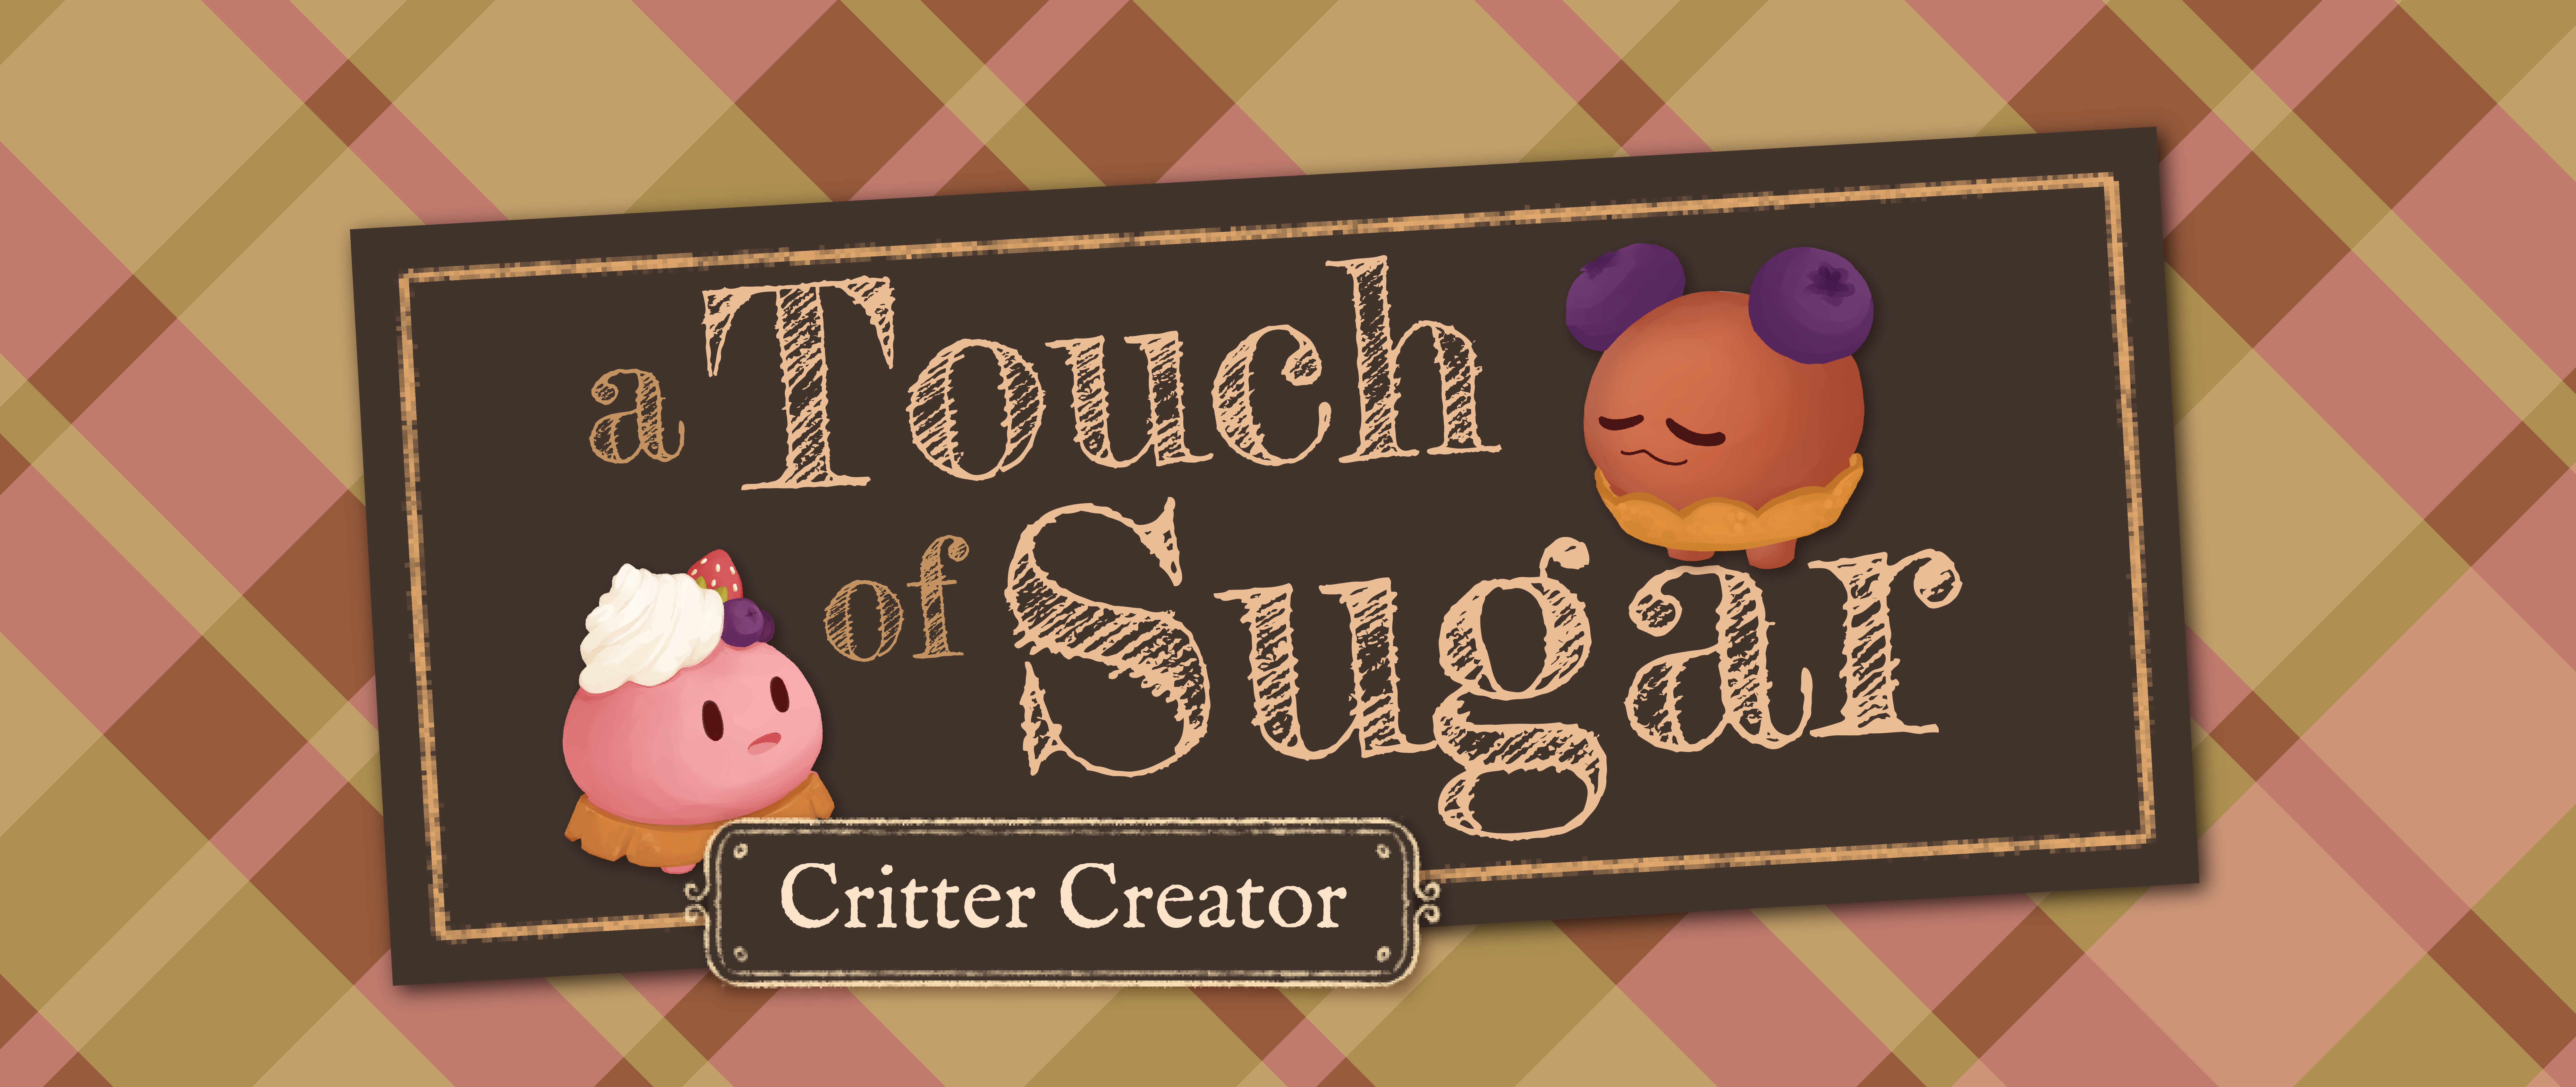 Title image of A Touch of Sugar: Critter Creator